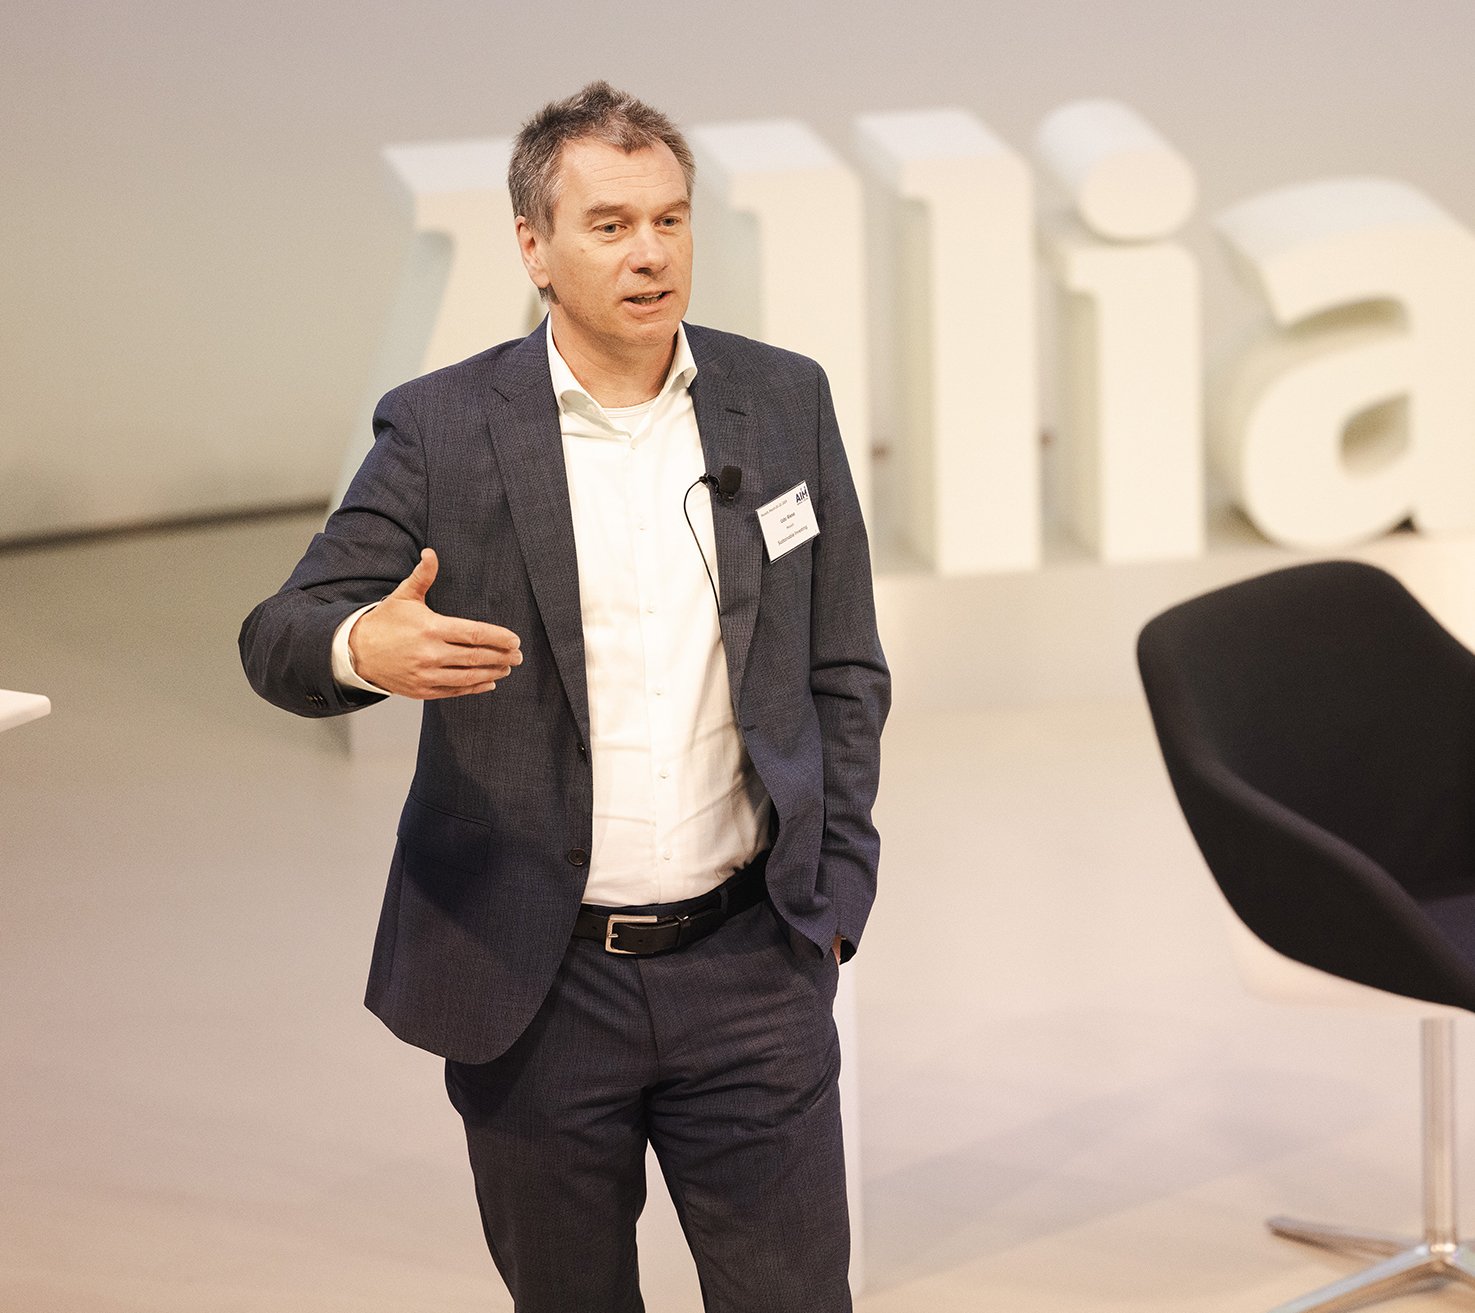 Udo Riese, Head of Sustainable Investment at Allianz Investment Management